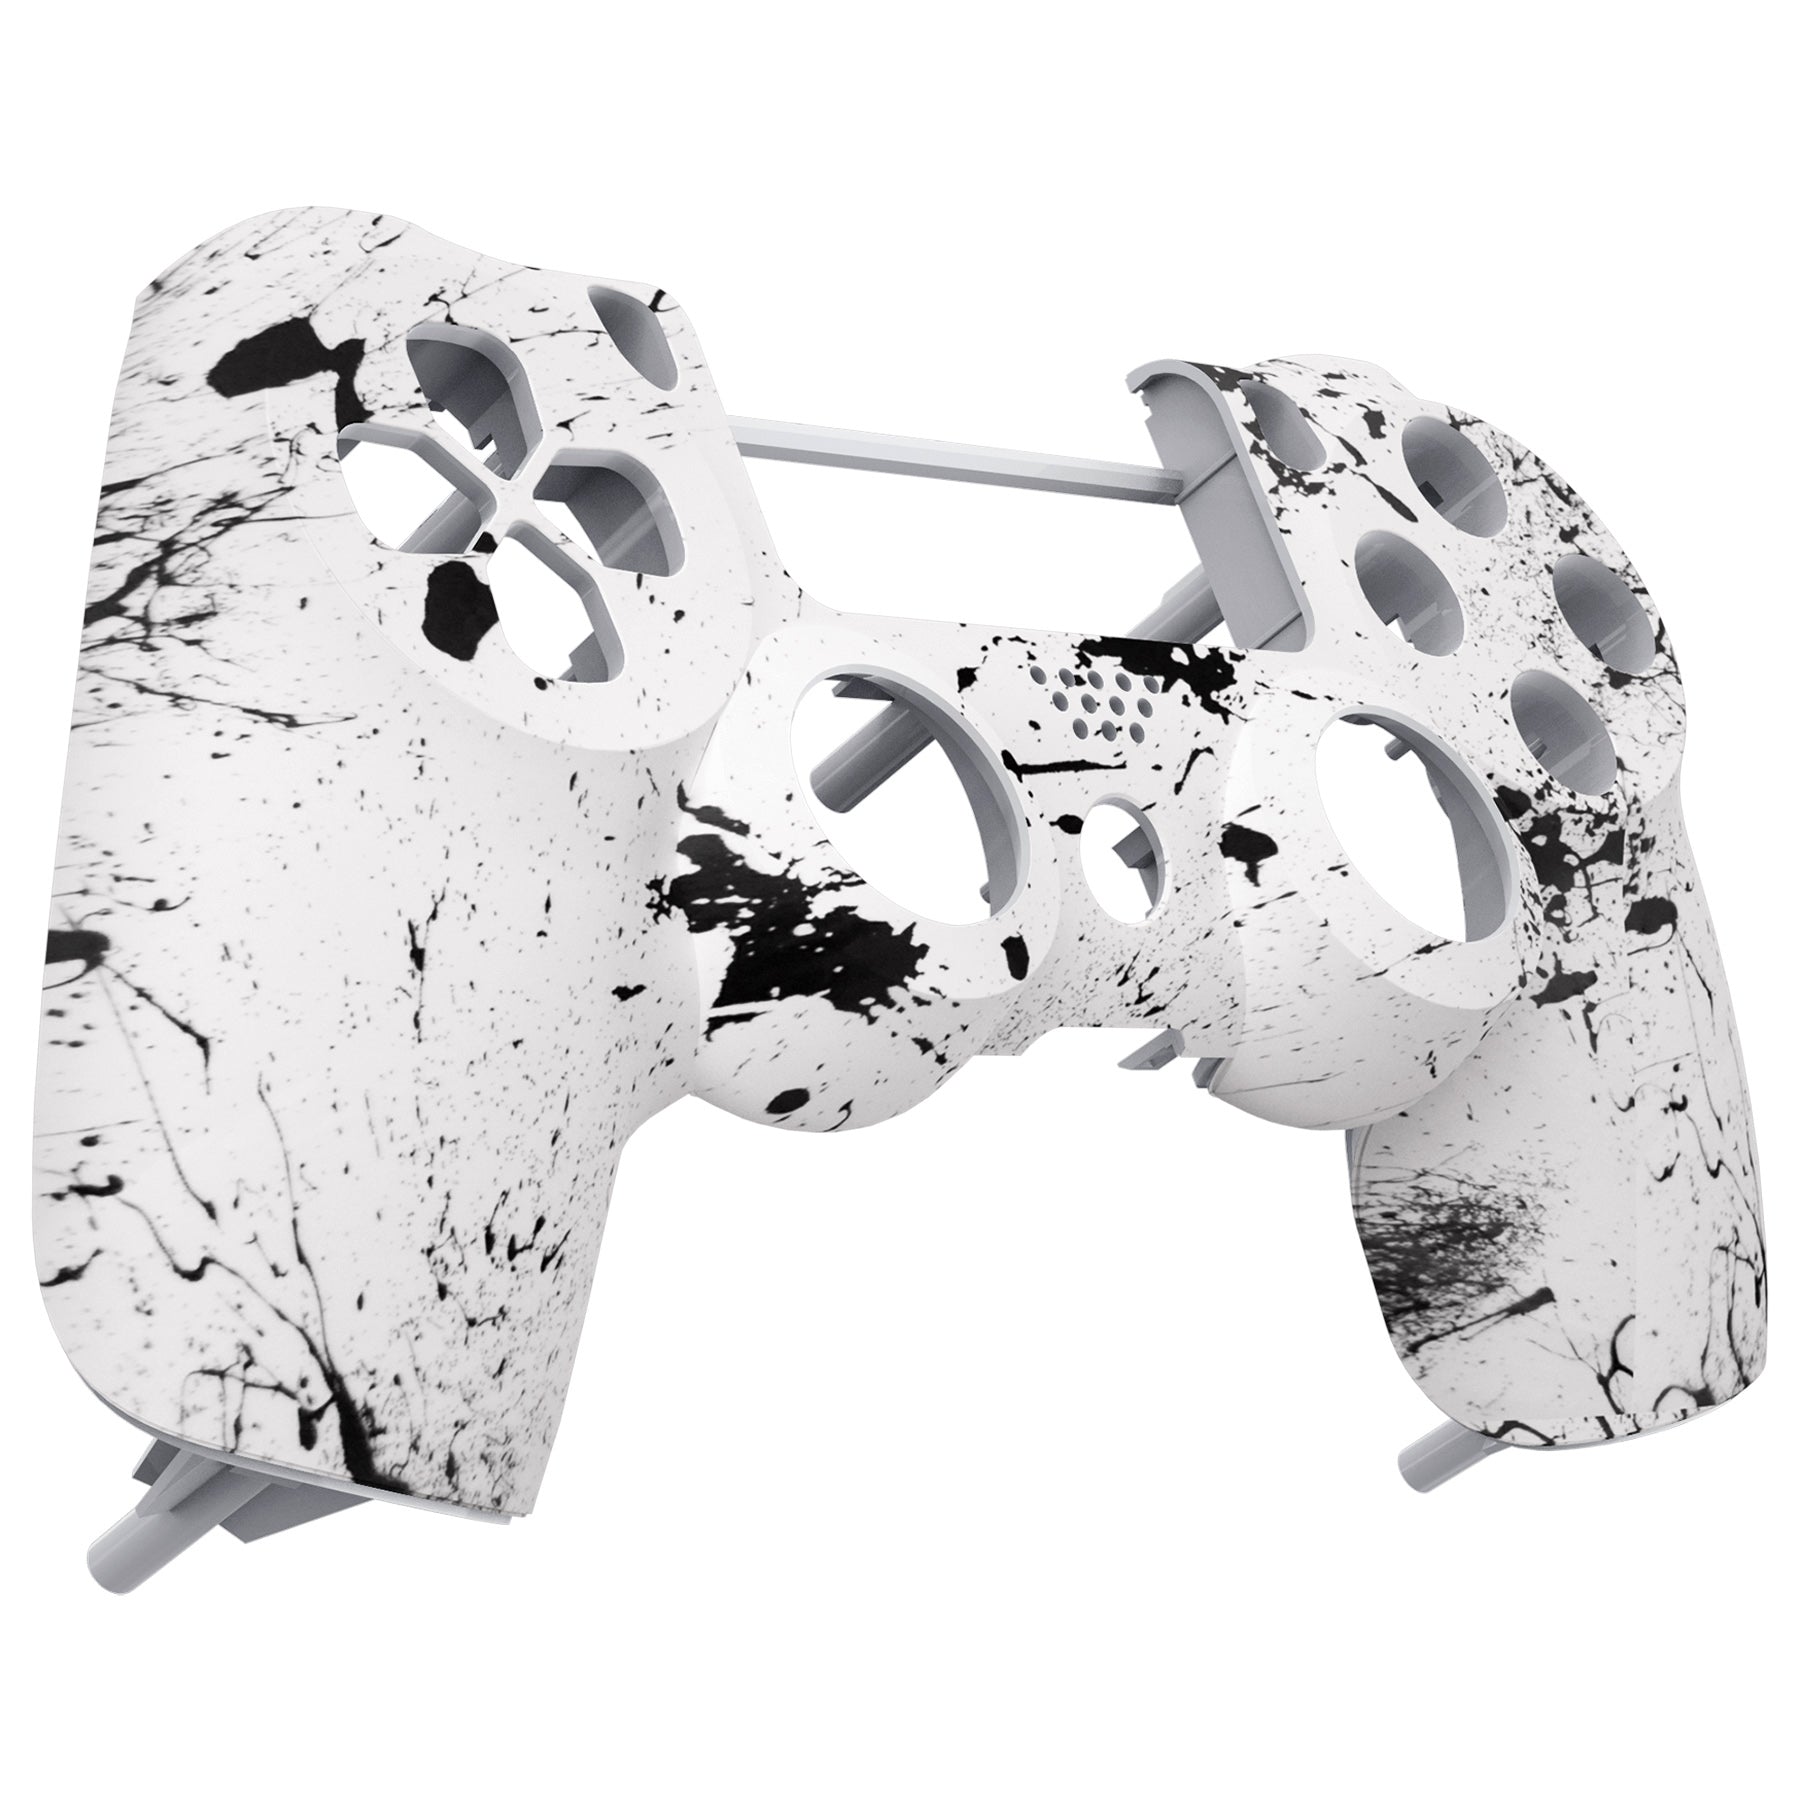 eXtremeRate Replacement Front Housing Shell for PS4 Slim Pro Controller  Controller (CUH-ZCT2 JDM-040/050/055) - White Splashing Spray